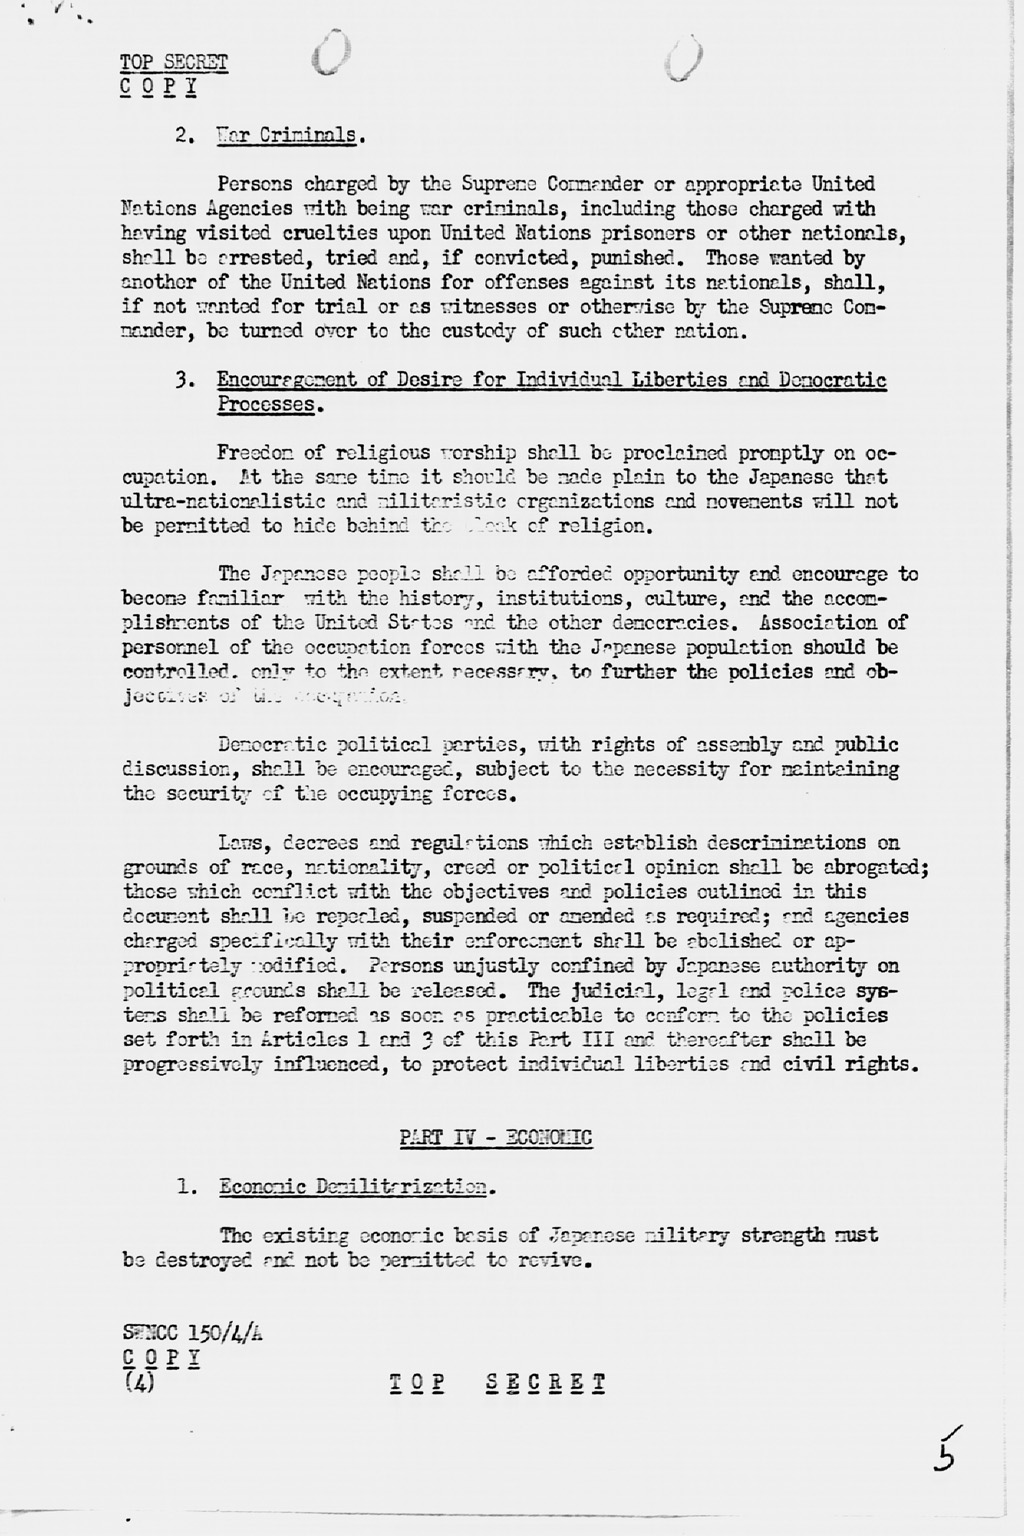 U.S. Initial Post-Surrender Policy for Japan　(SWNCC150/4/A) (拡大画像)